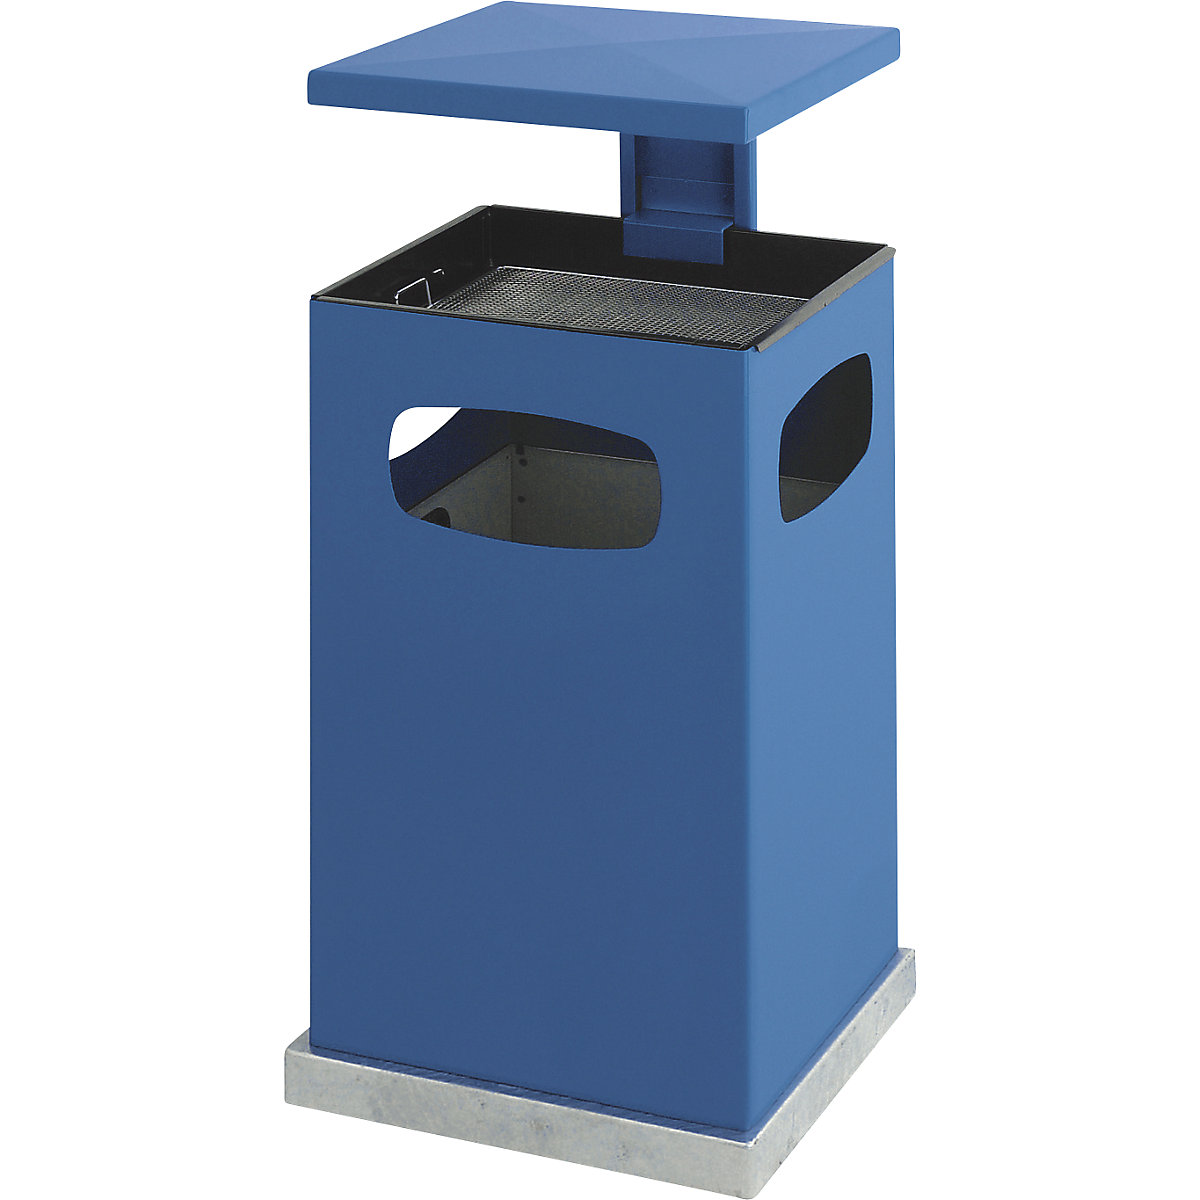 Waste collector with ashtray insert and protective cover, capacity 72 l, WxHxD 500 x 955 x 500 mm, gentian blue